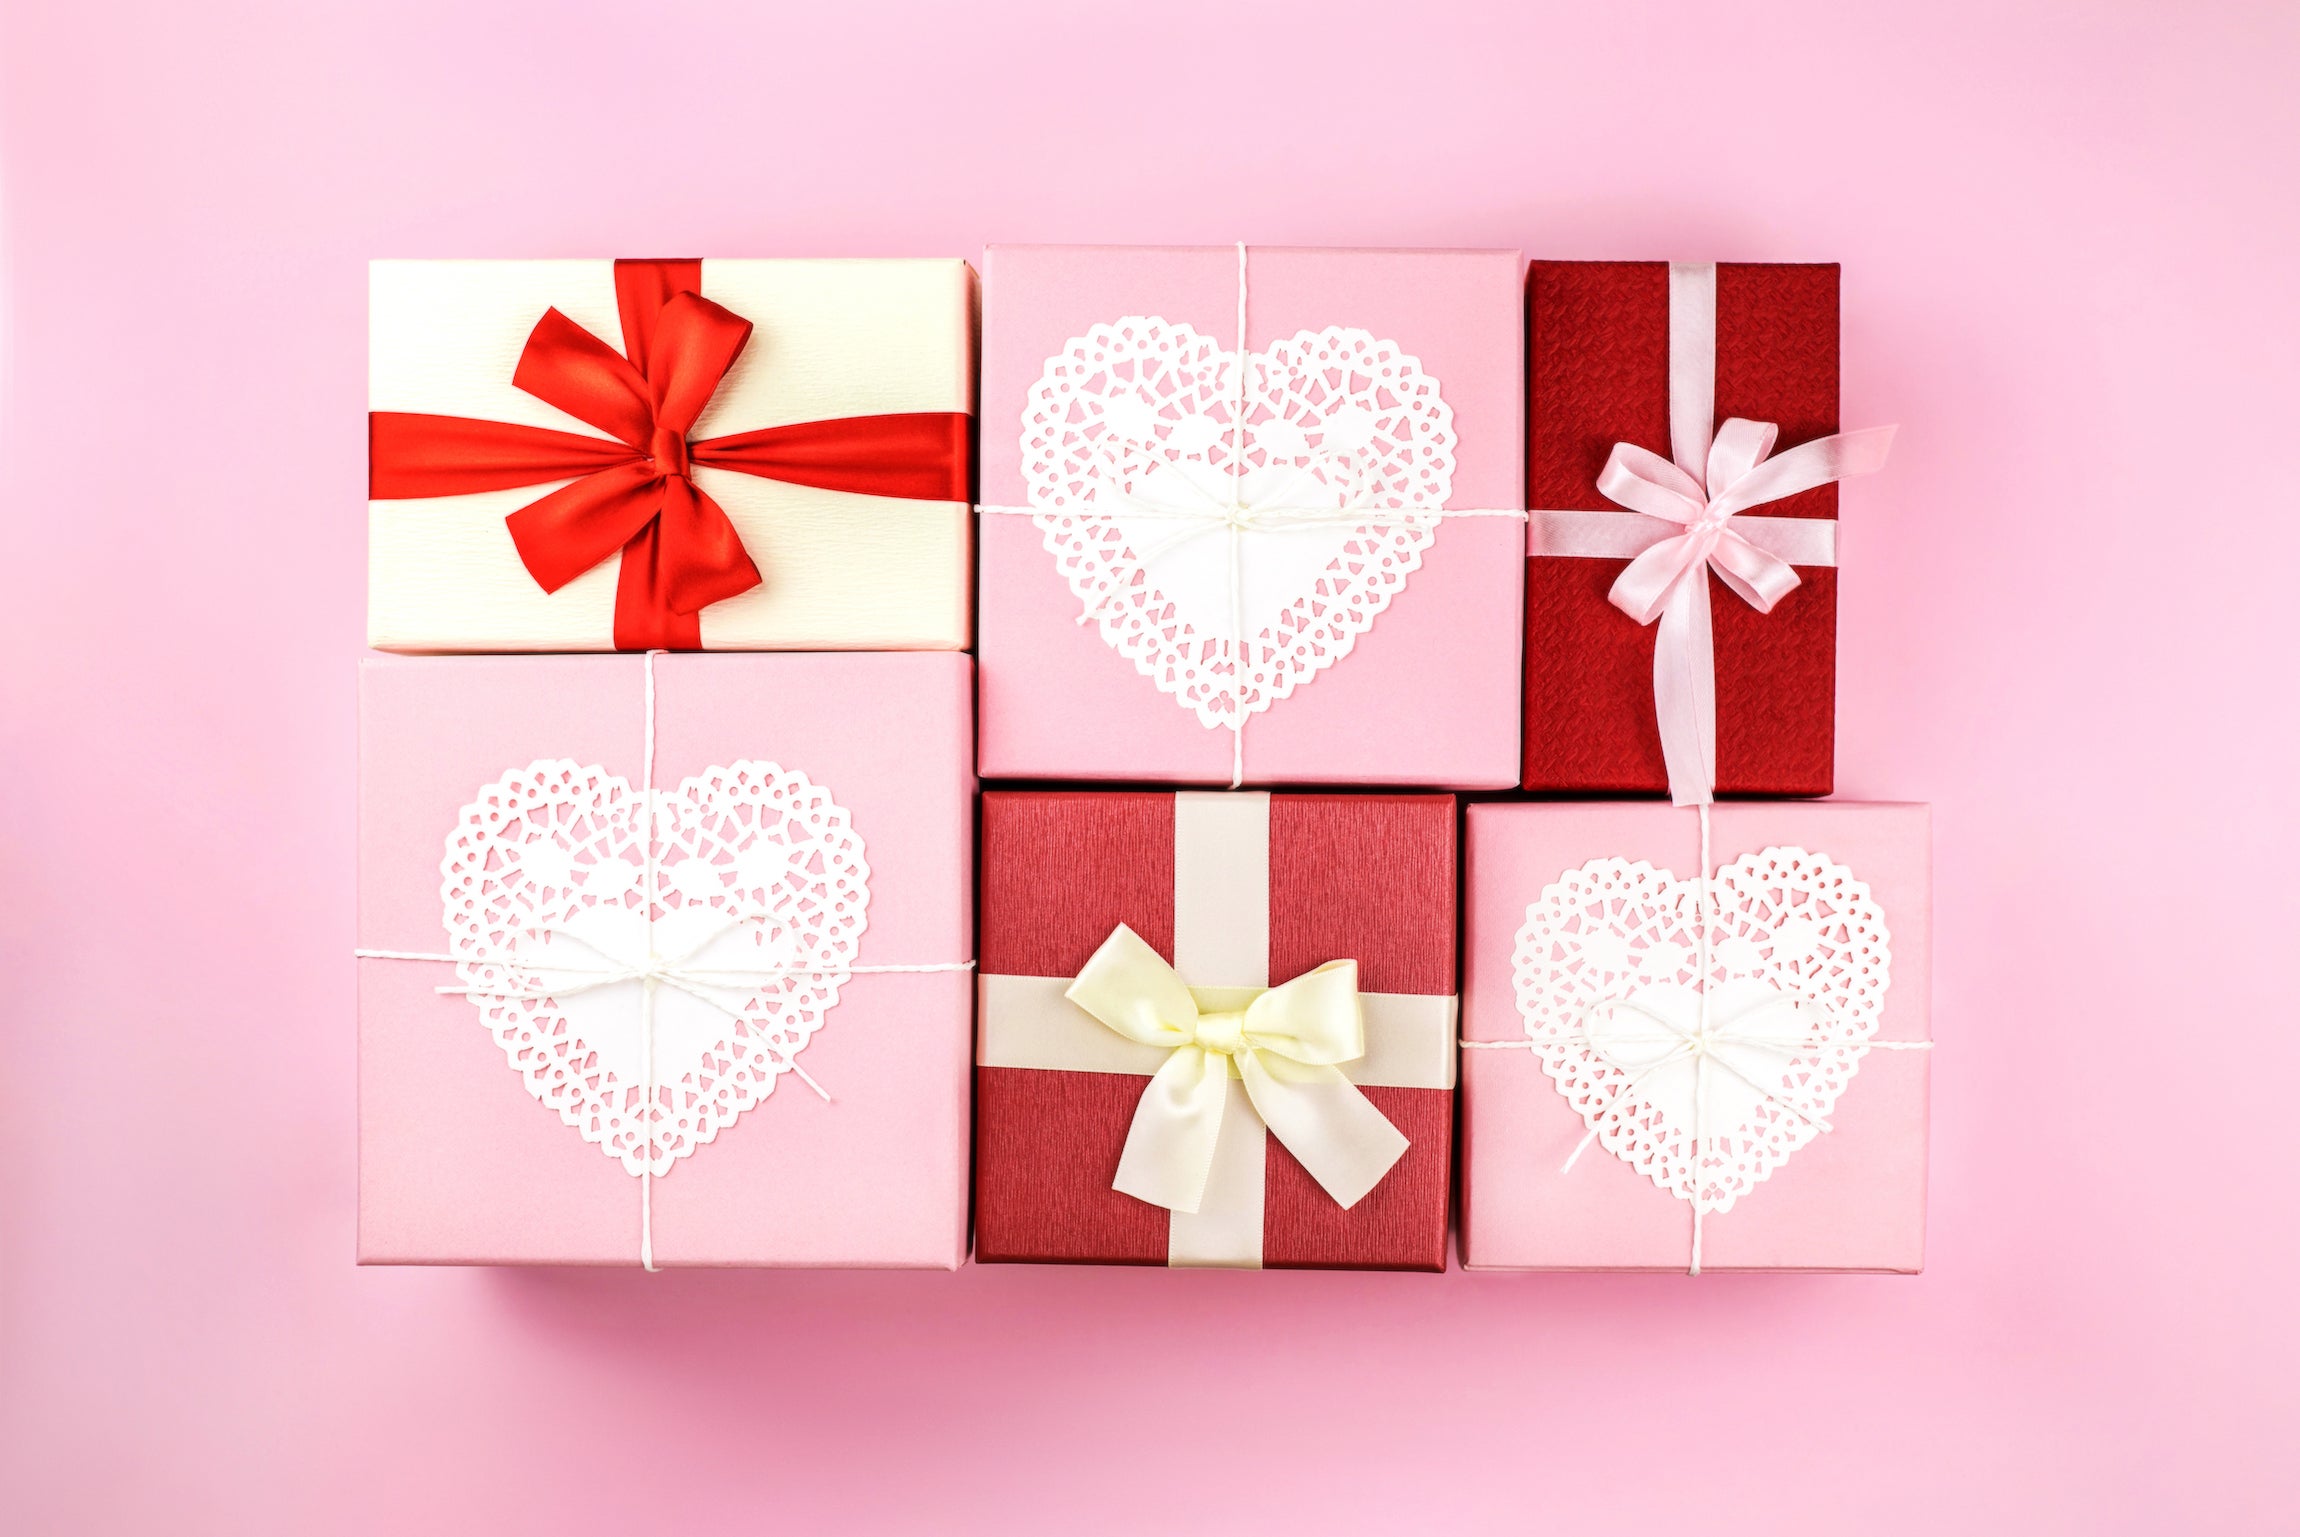 70 Top Valentine's Day Gifts 2024 - Thoughtful Gift Ideas